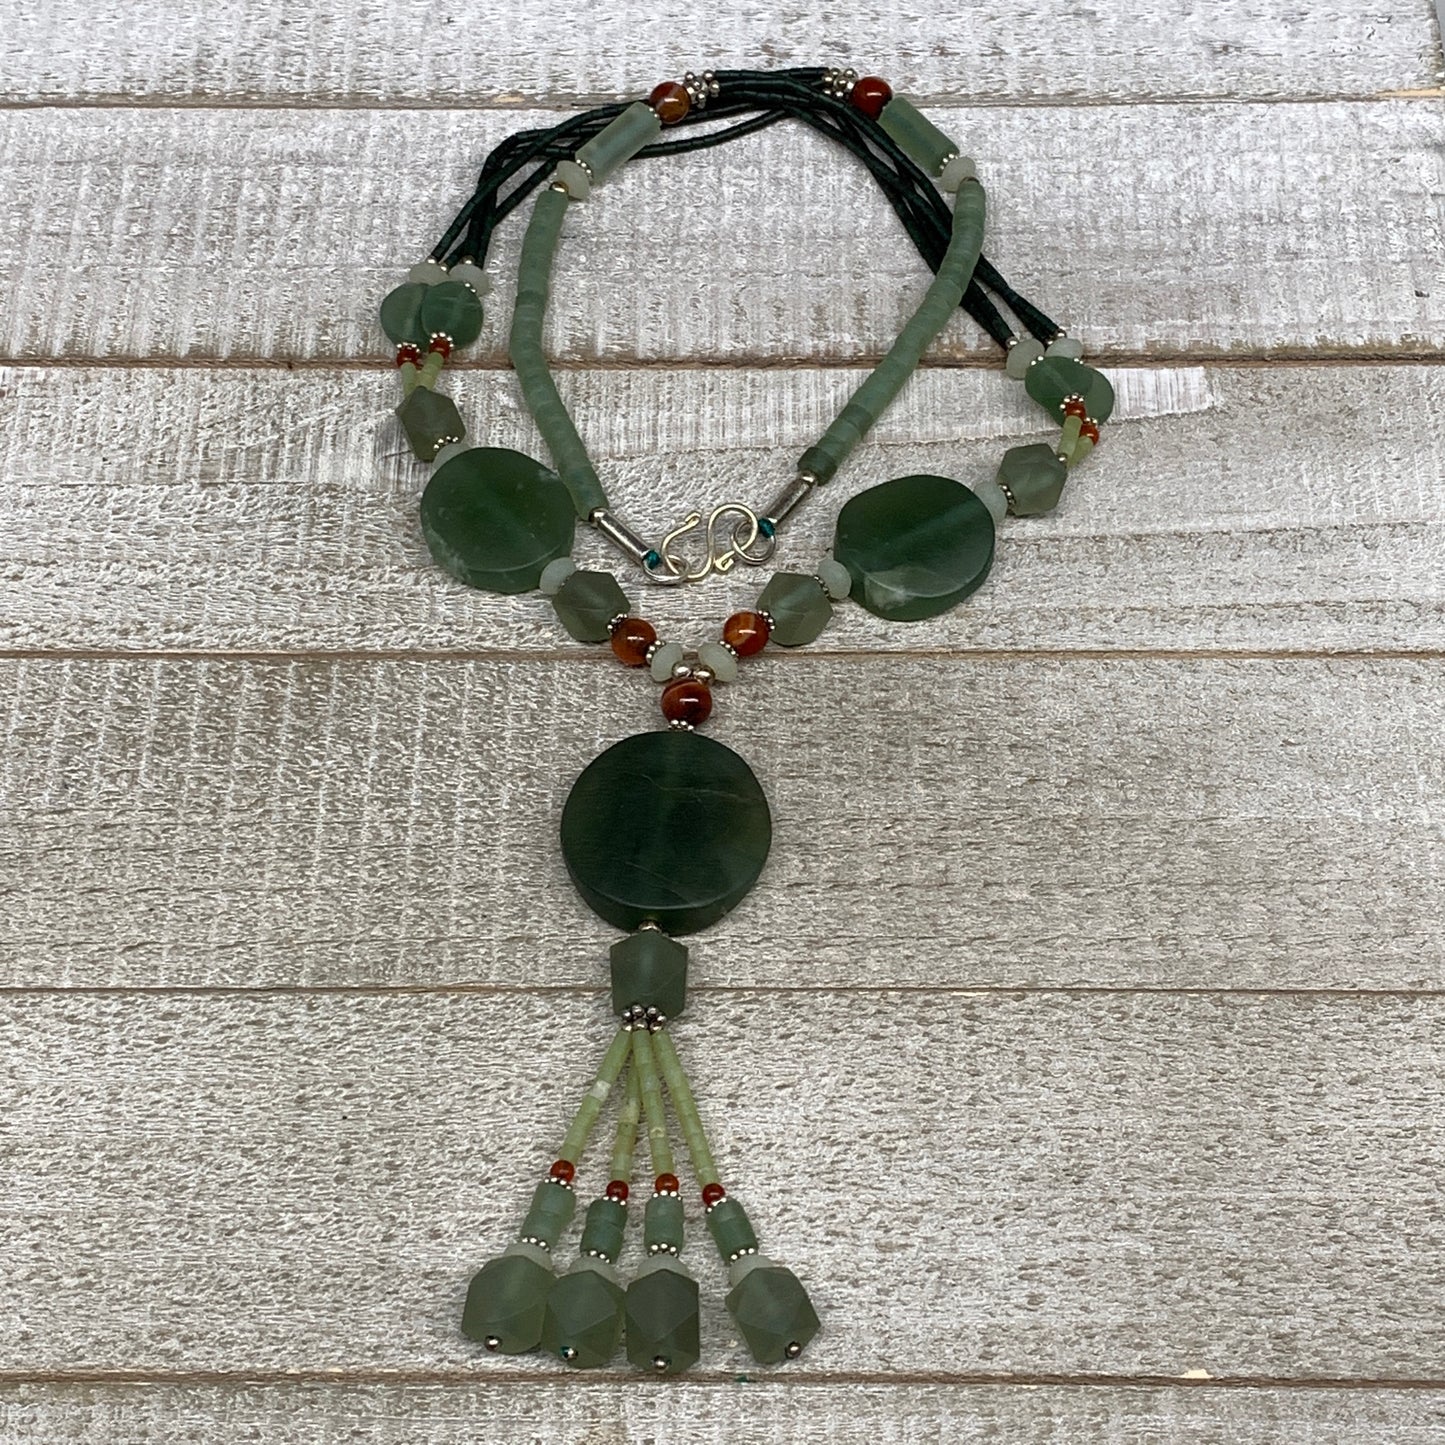 57.5g, 1mm-28mm, 21" Natural Untreated Green Serpentine Beaded Necklace, P237